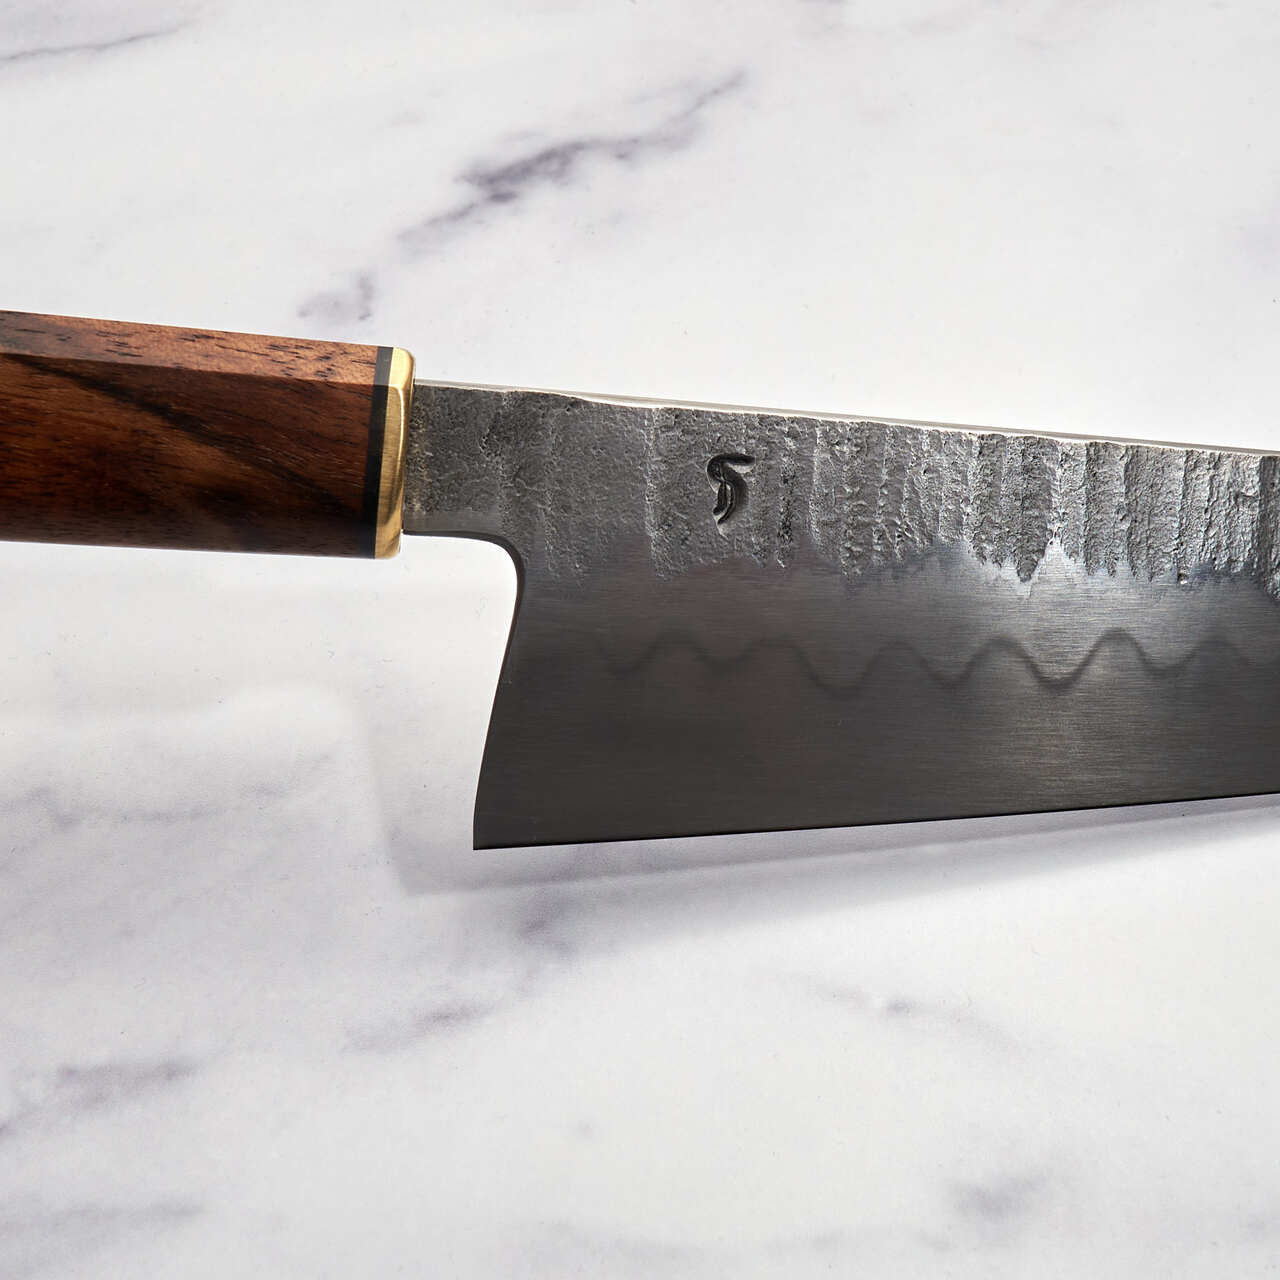 MCX K-Tip Gyuto 250mm 26c3 Limited Release by Fredrik Spåre - 2nd Edition - Texture